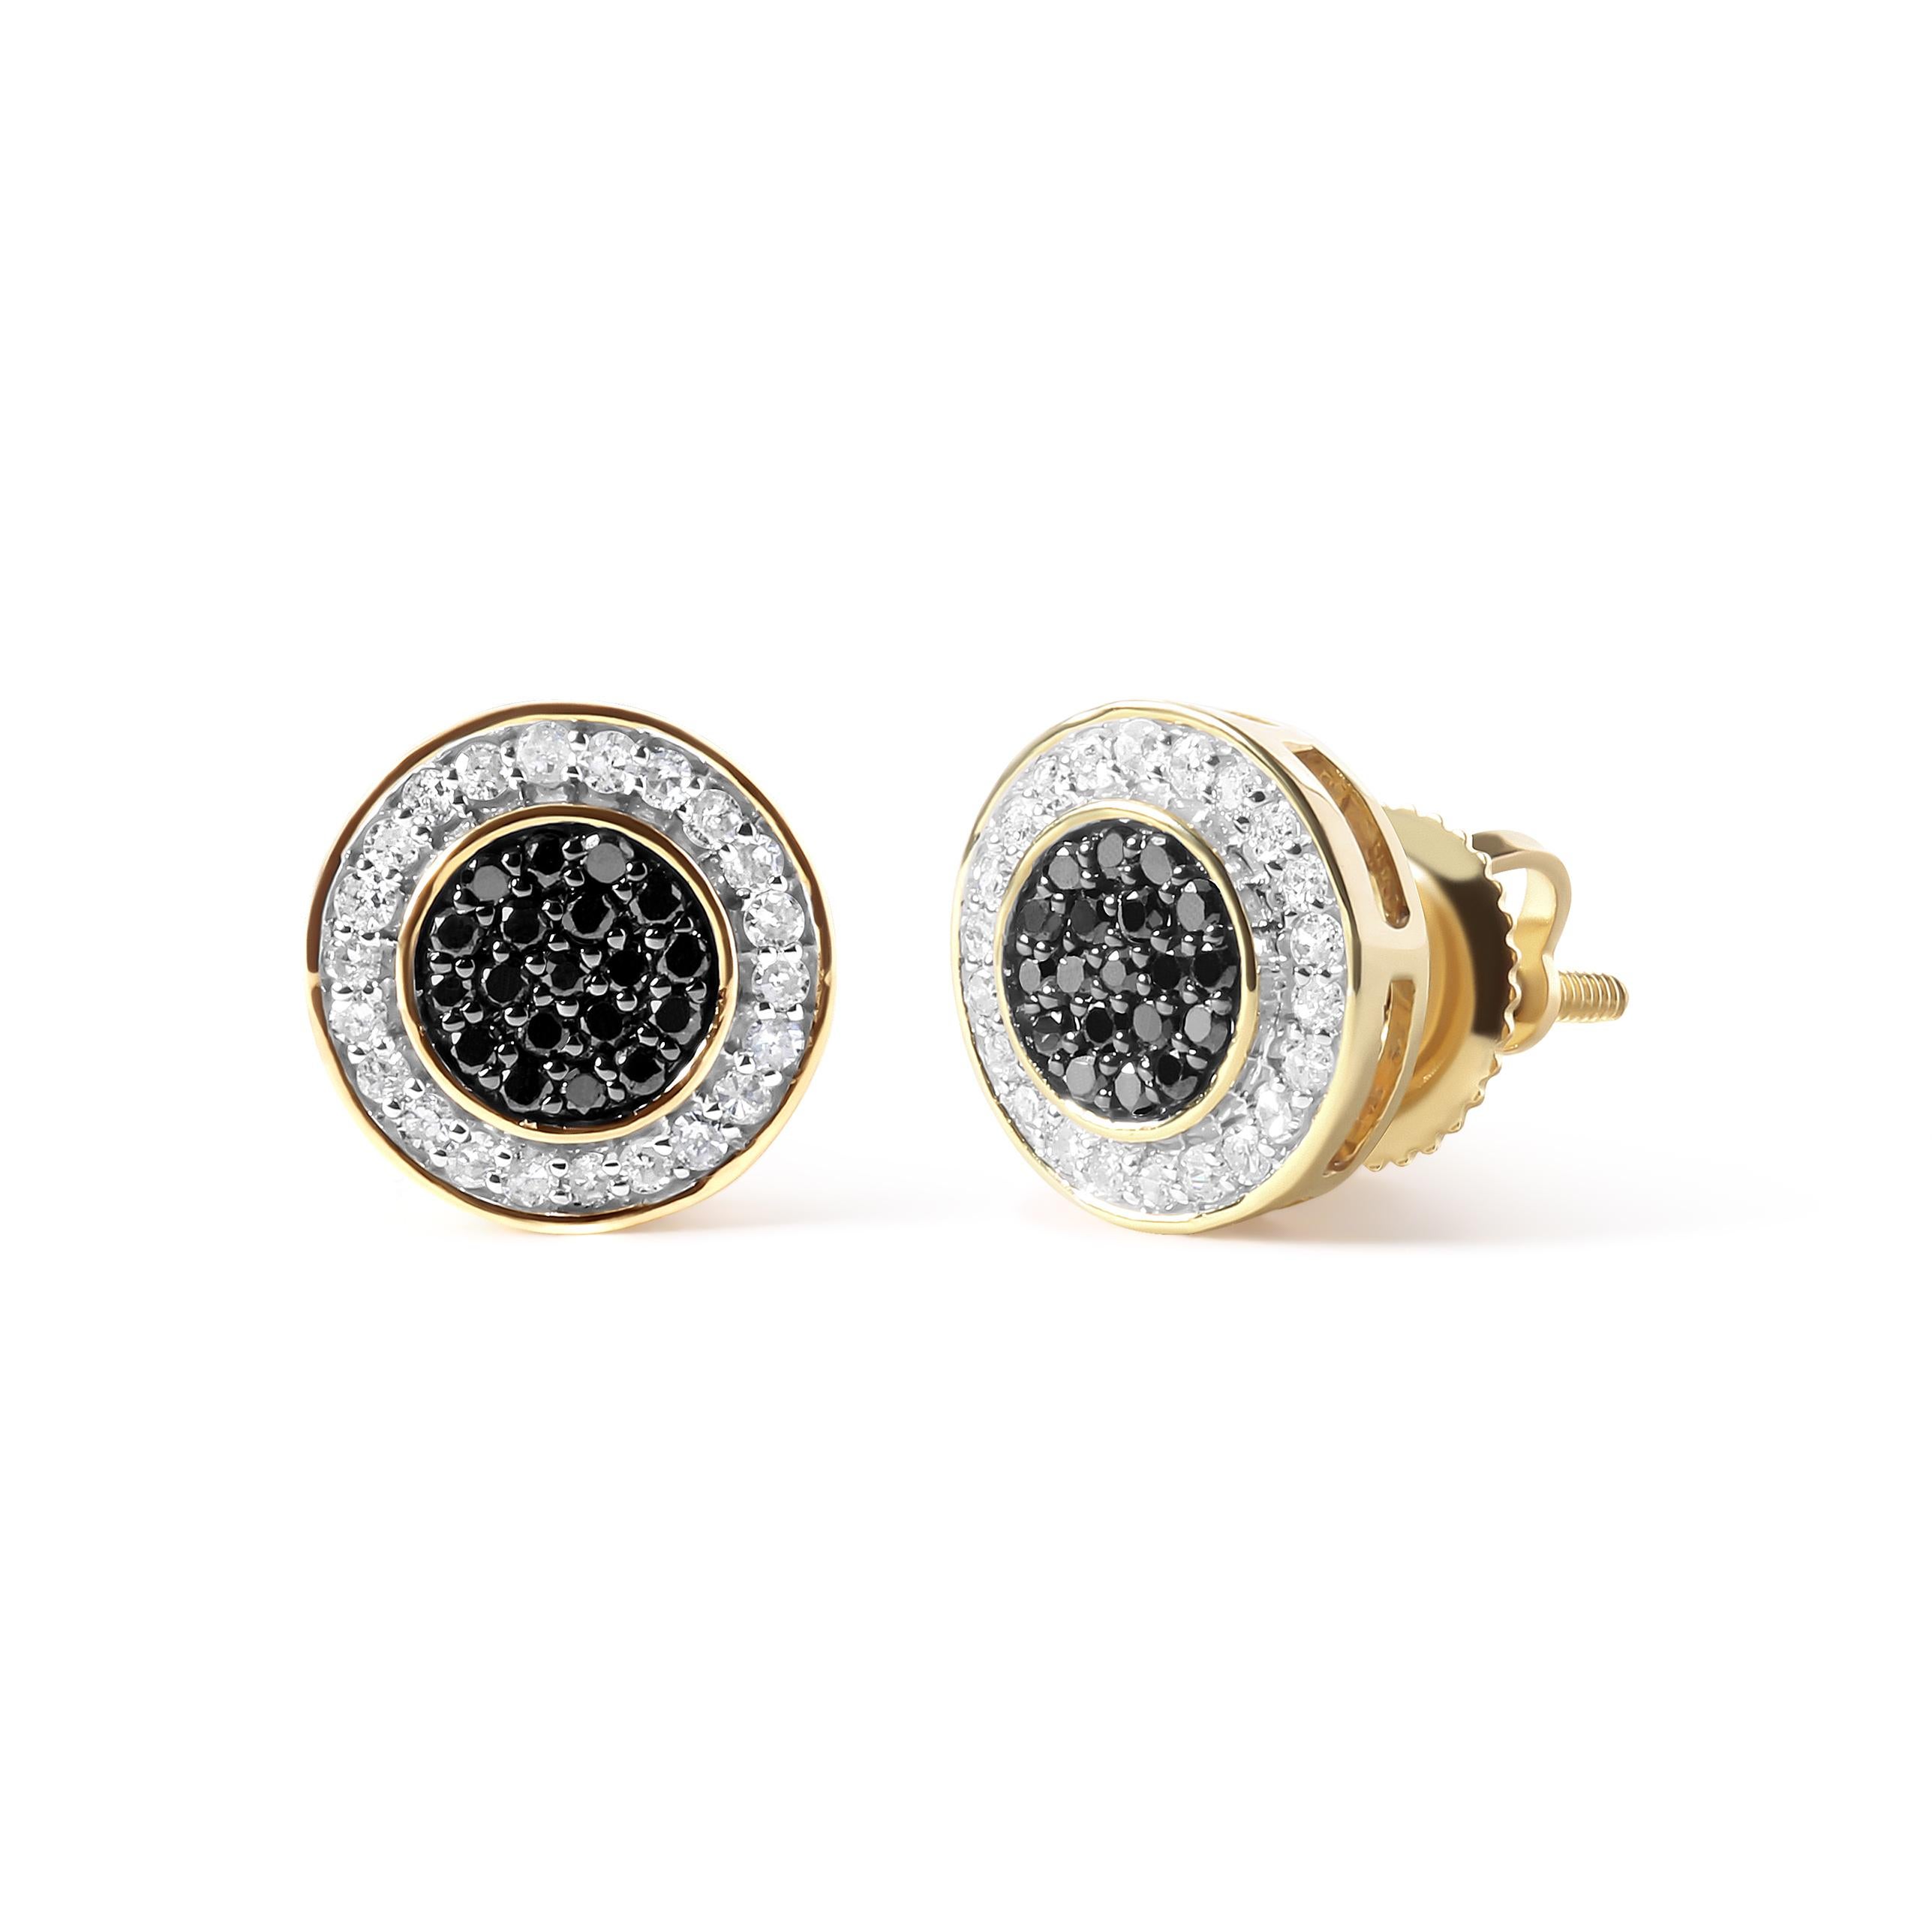 Indulge in a touch of luxury with these stunning men's diamond stud earrings. Crafted from 10K yellow gold, these earrings sparkle with a total of 82 diamonds. 38 of these diamonds are treated black, adding a bold and unique touch, while 44 white